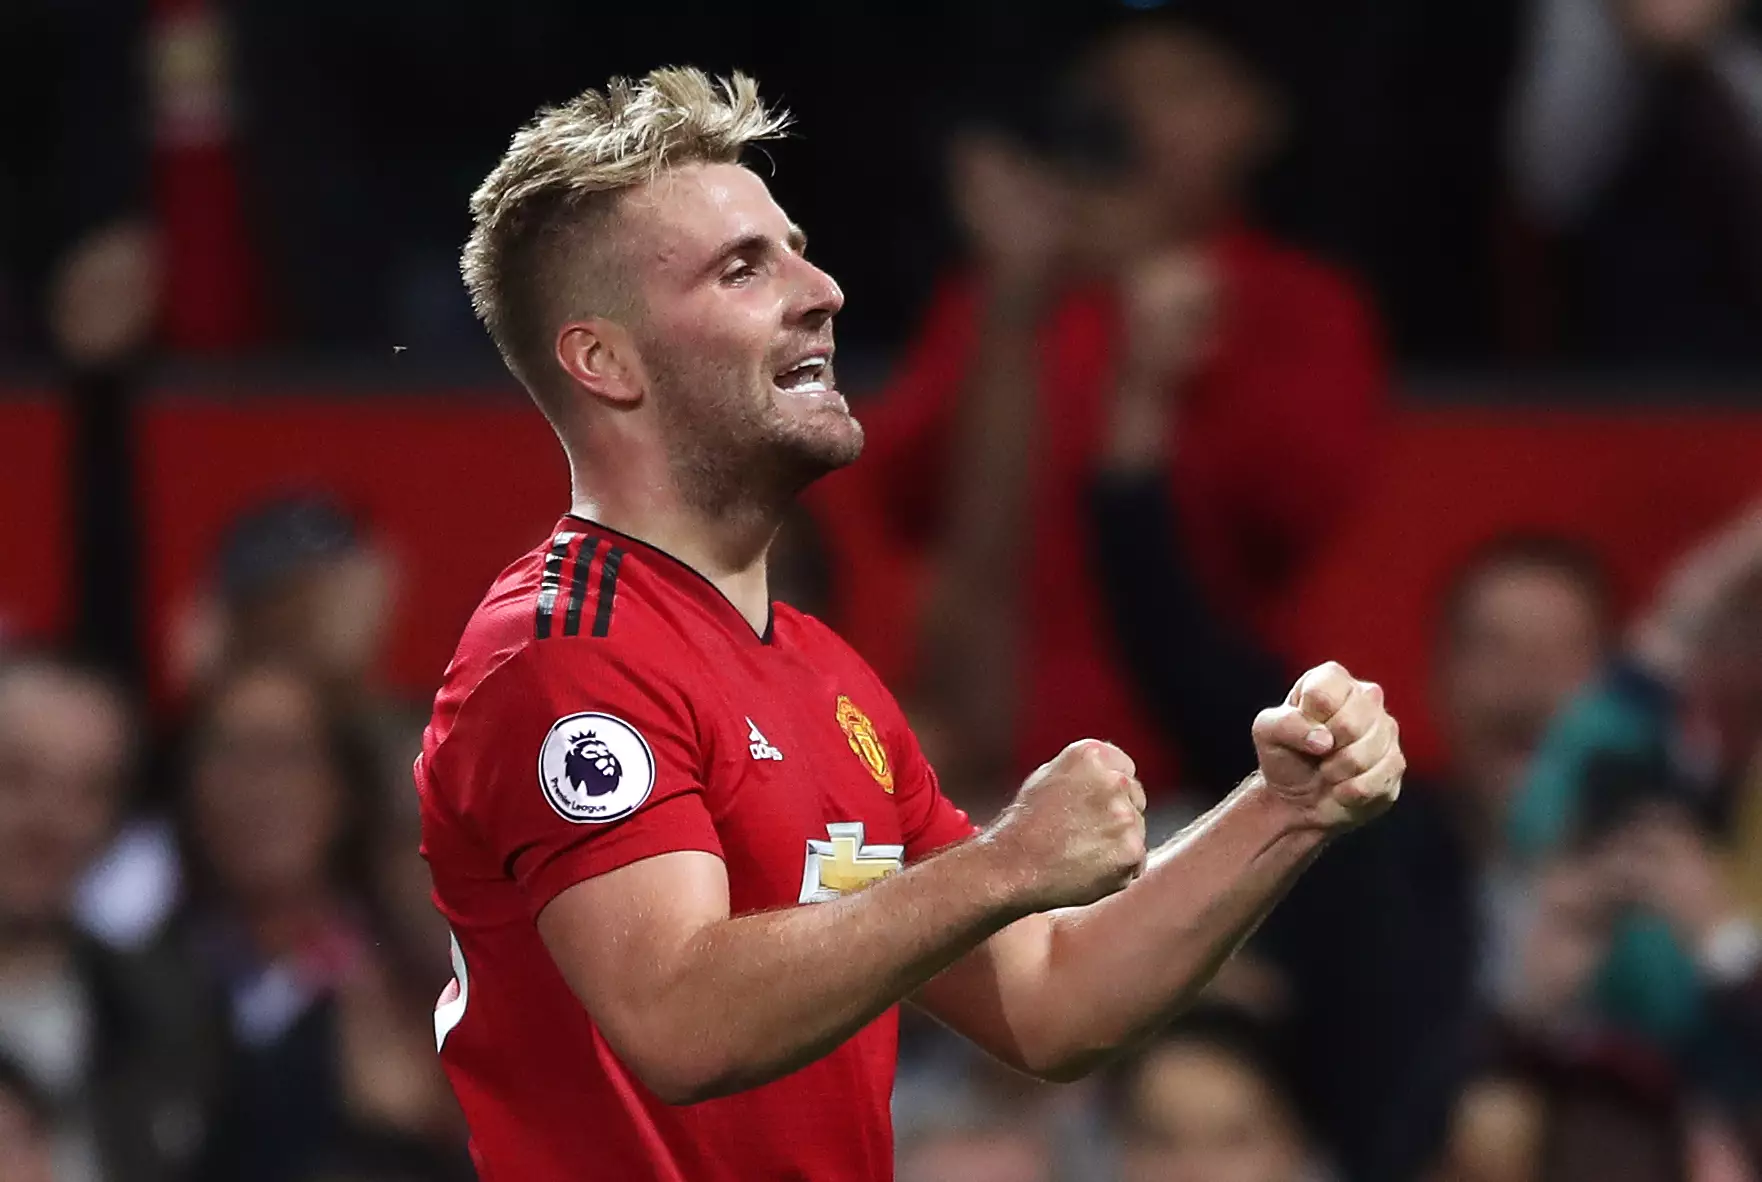 Shaw's resurgence includes scoring the winner against Leicester. Image: PA Images